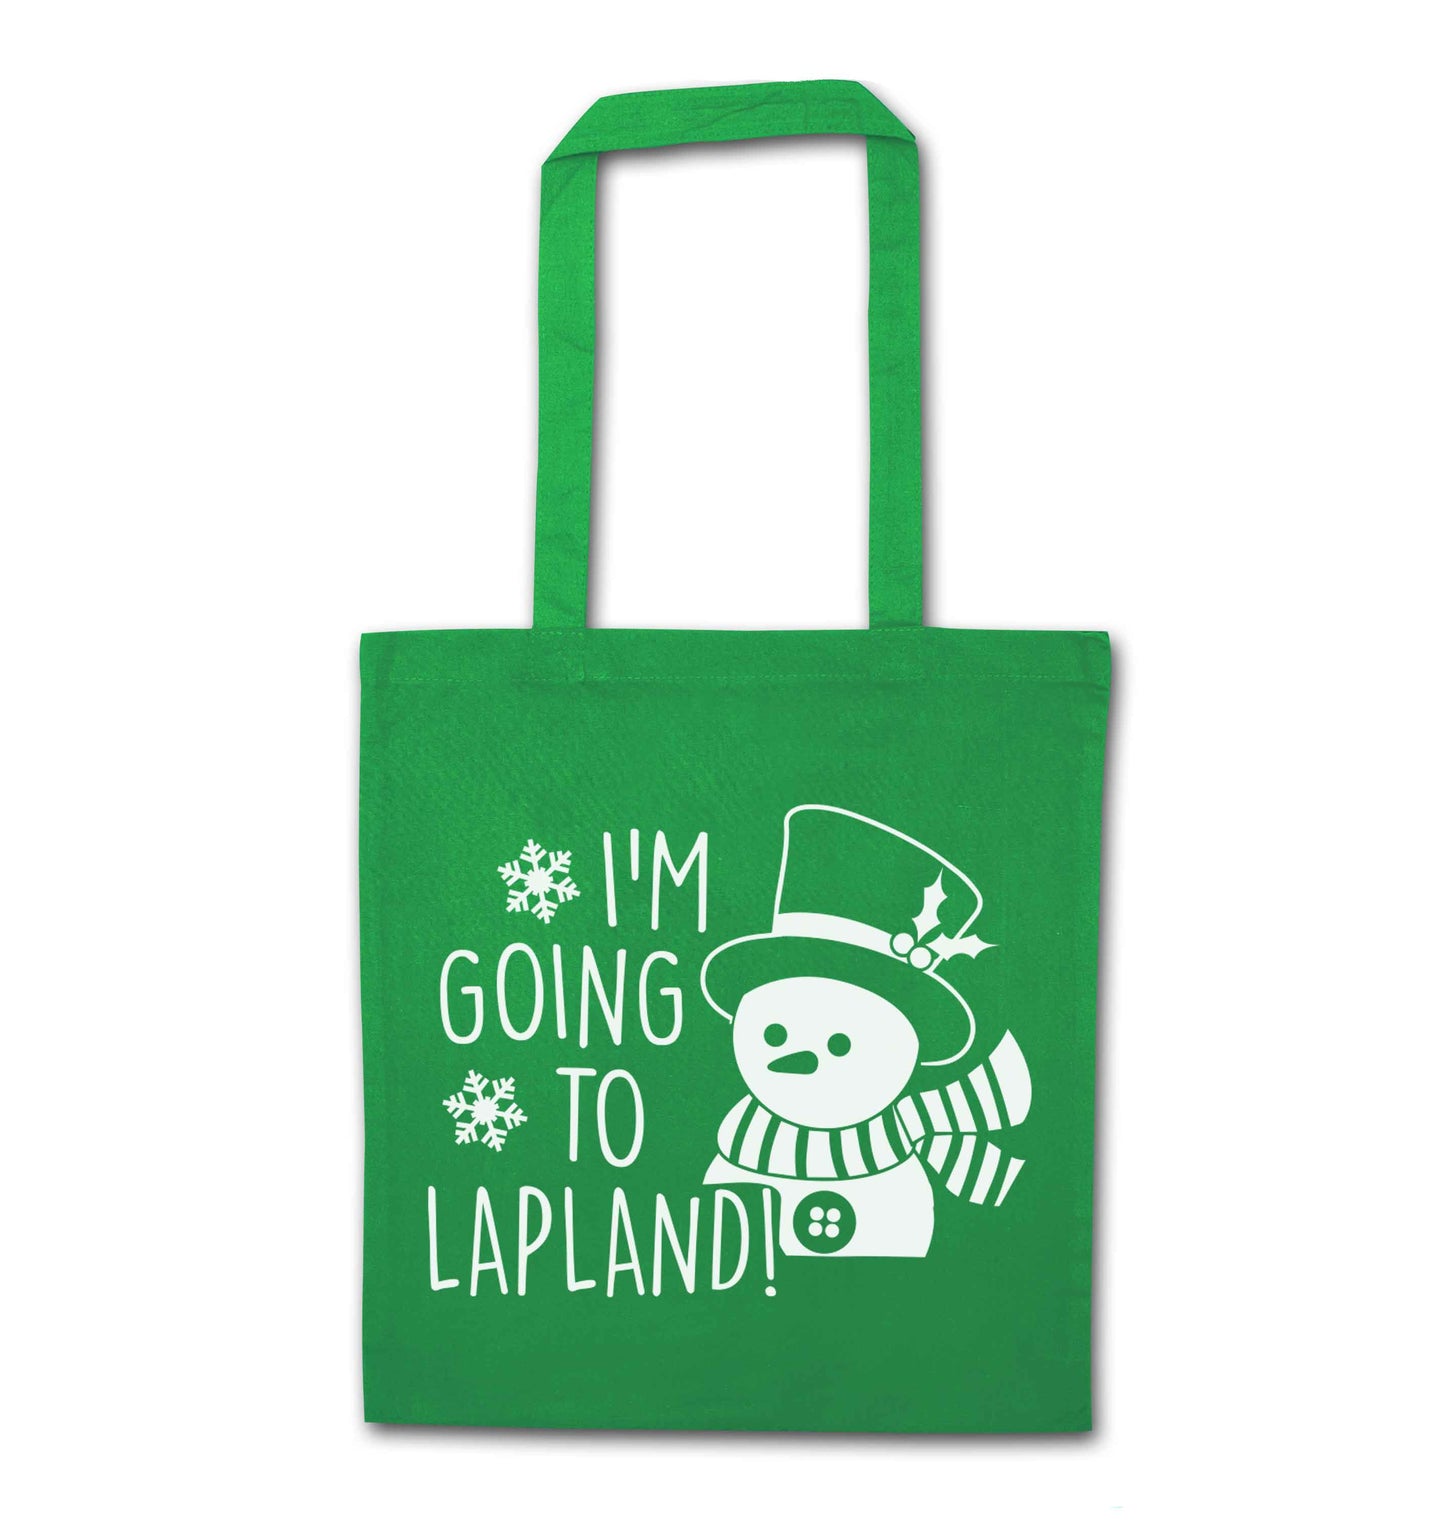 I'm going to Lapland green tote bag